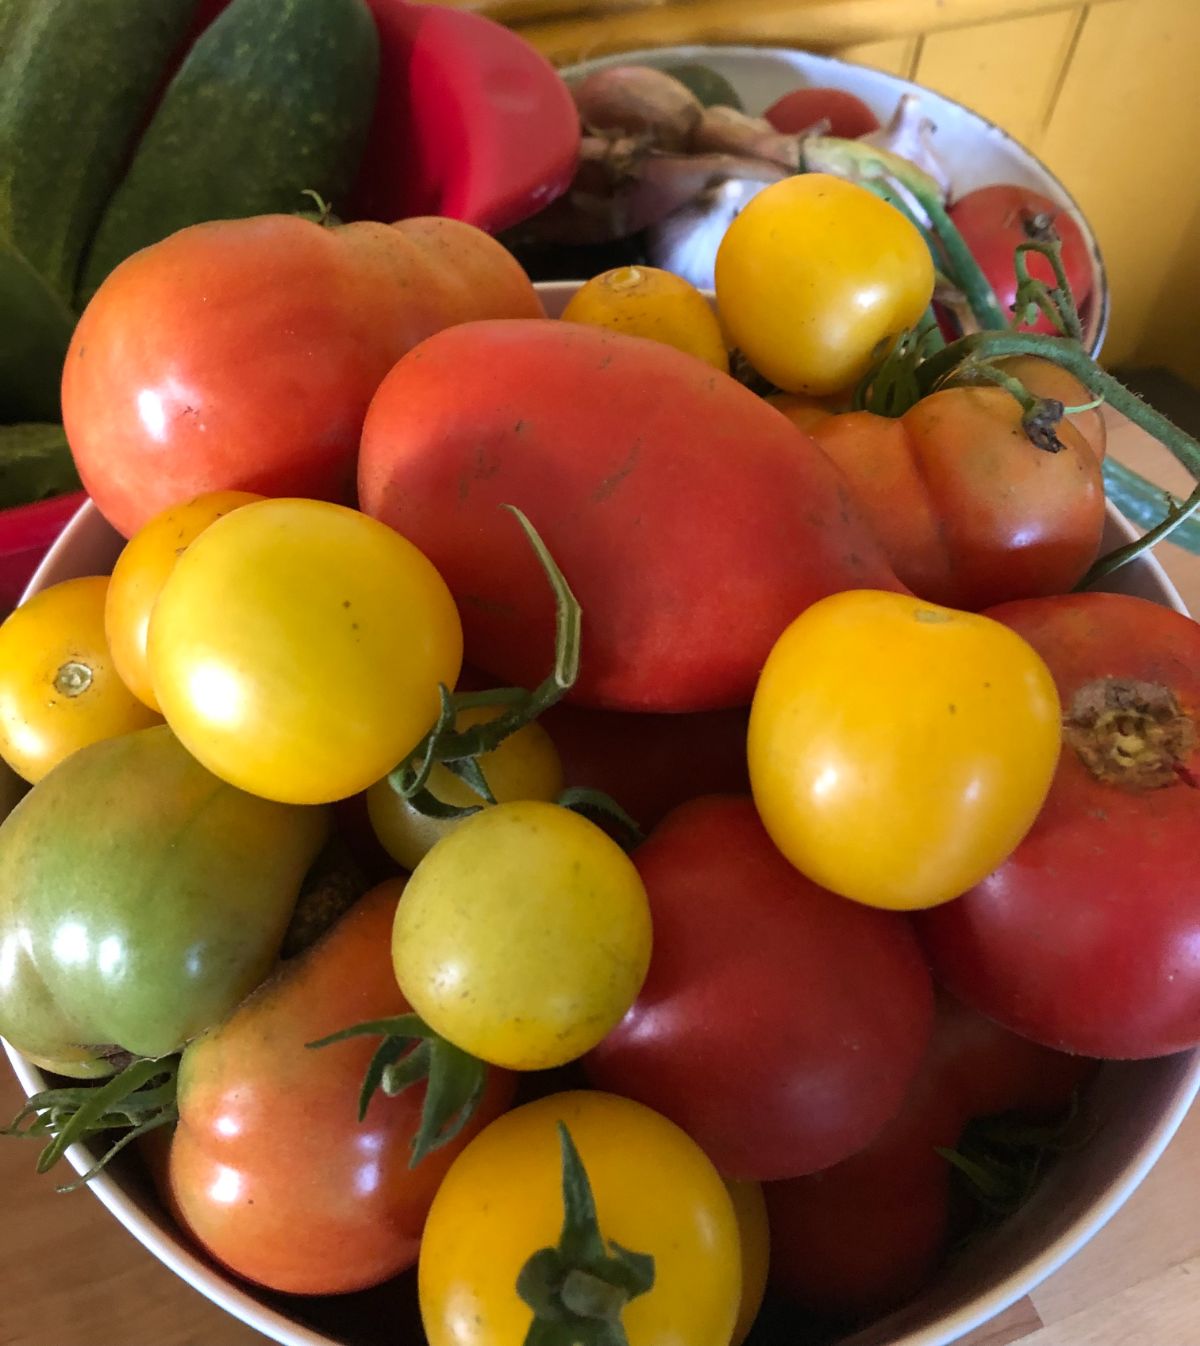 A variety of types of tomatoes waiting to be preserved